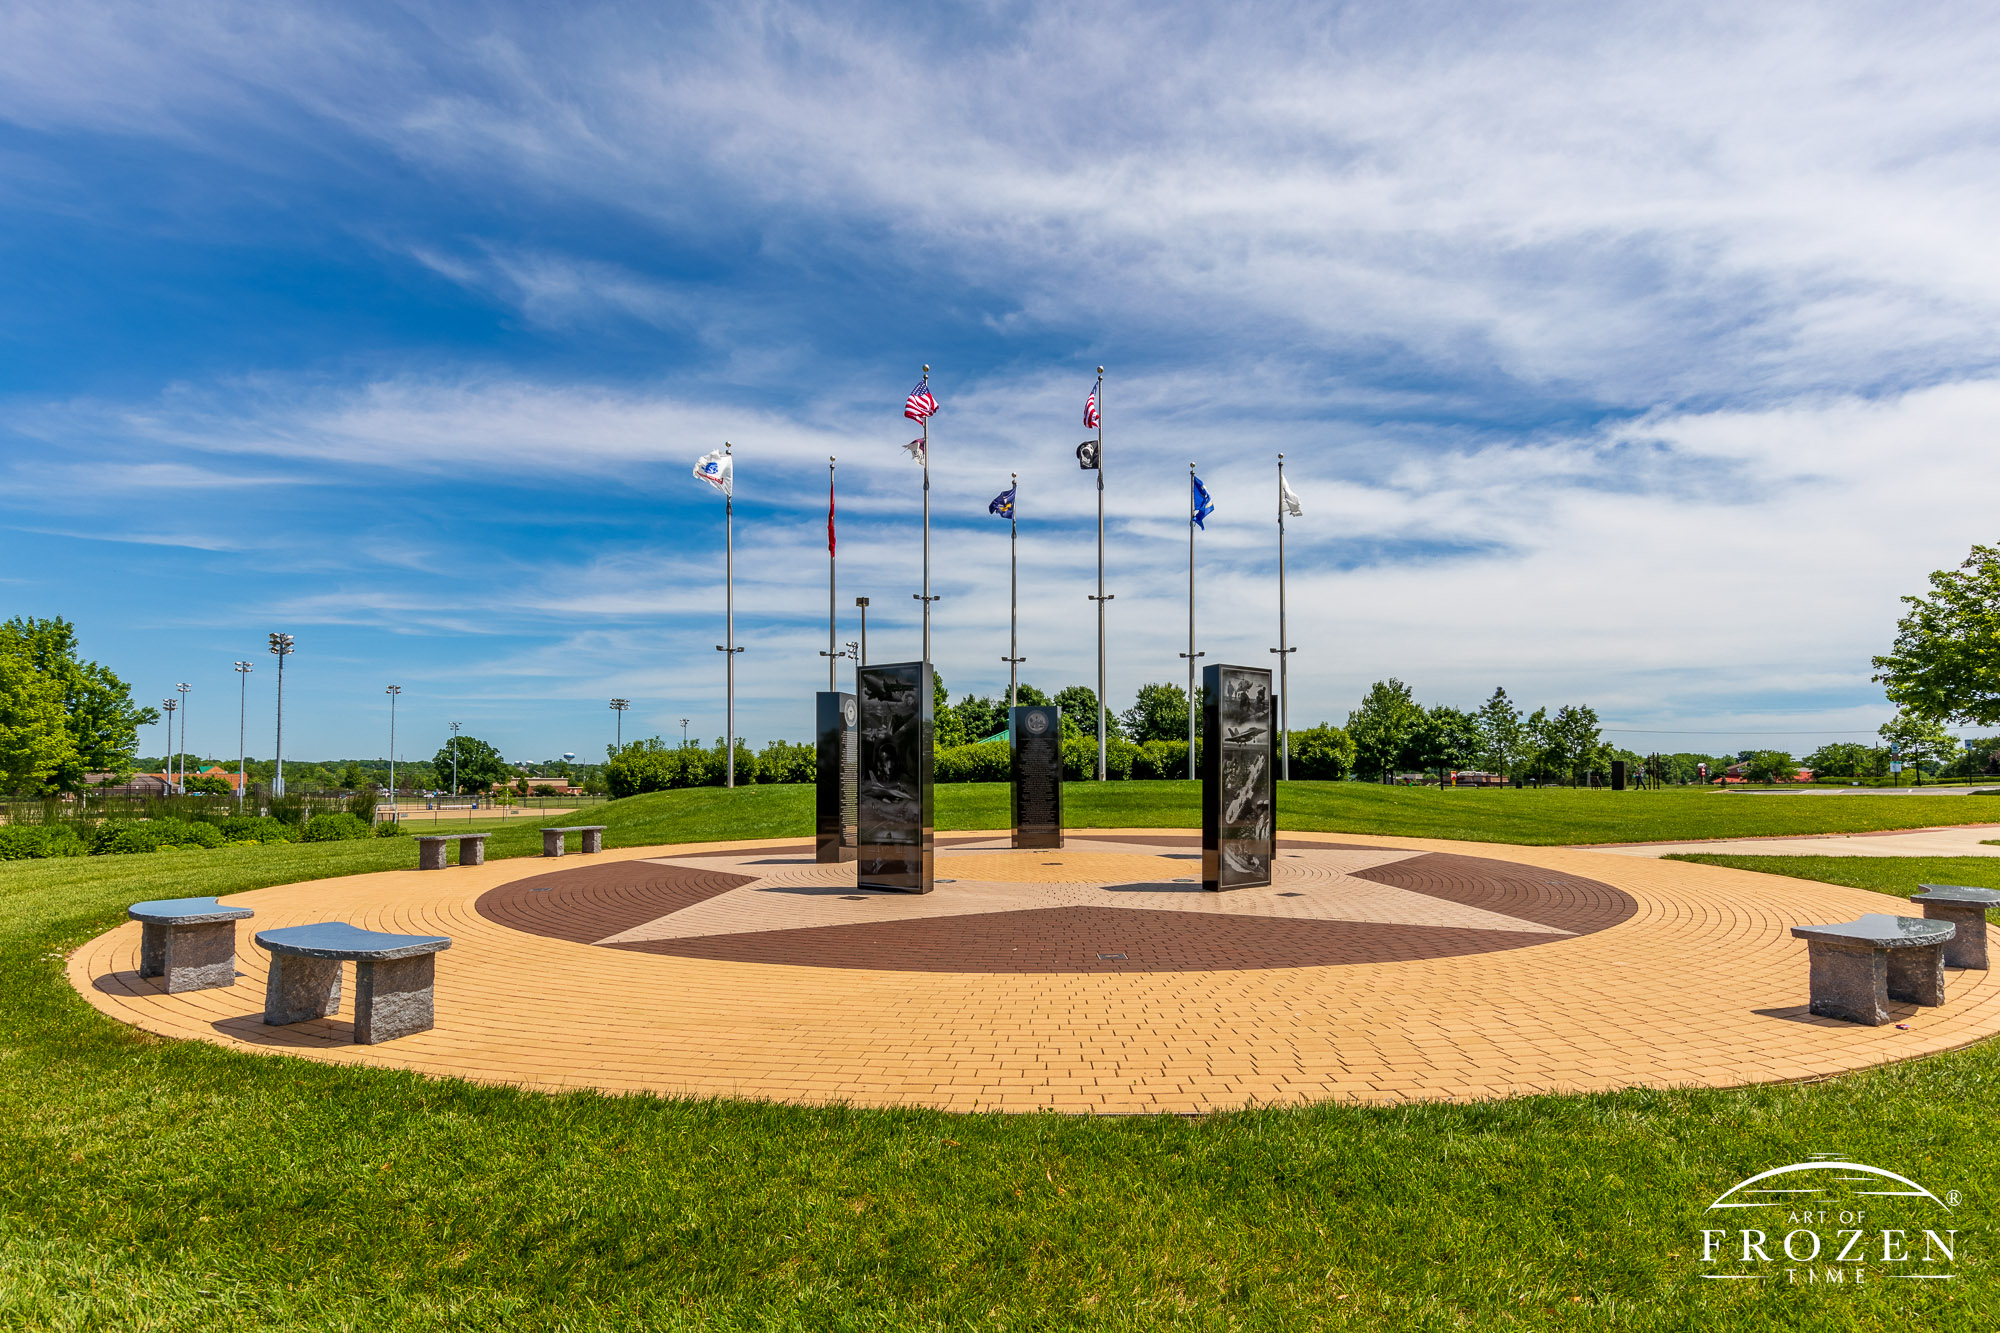 Delco Park offers Kettering Ohio residents a large pond and walking paths and holds the city’s Veteran’s Plaza.